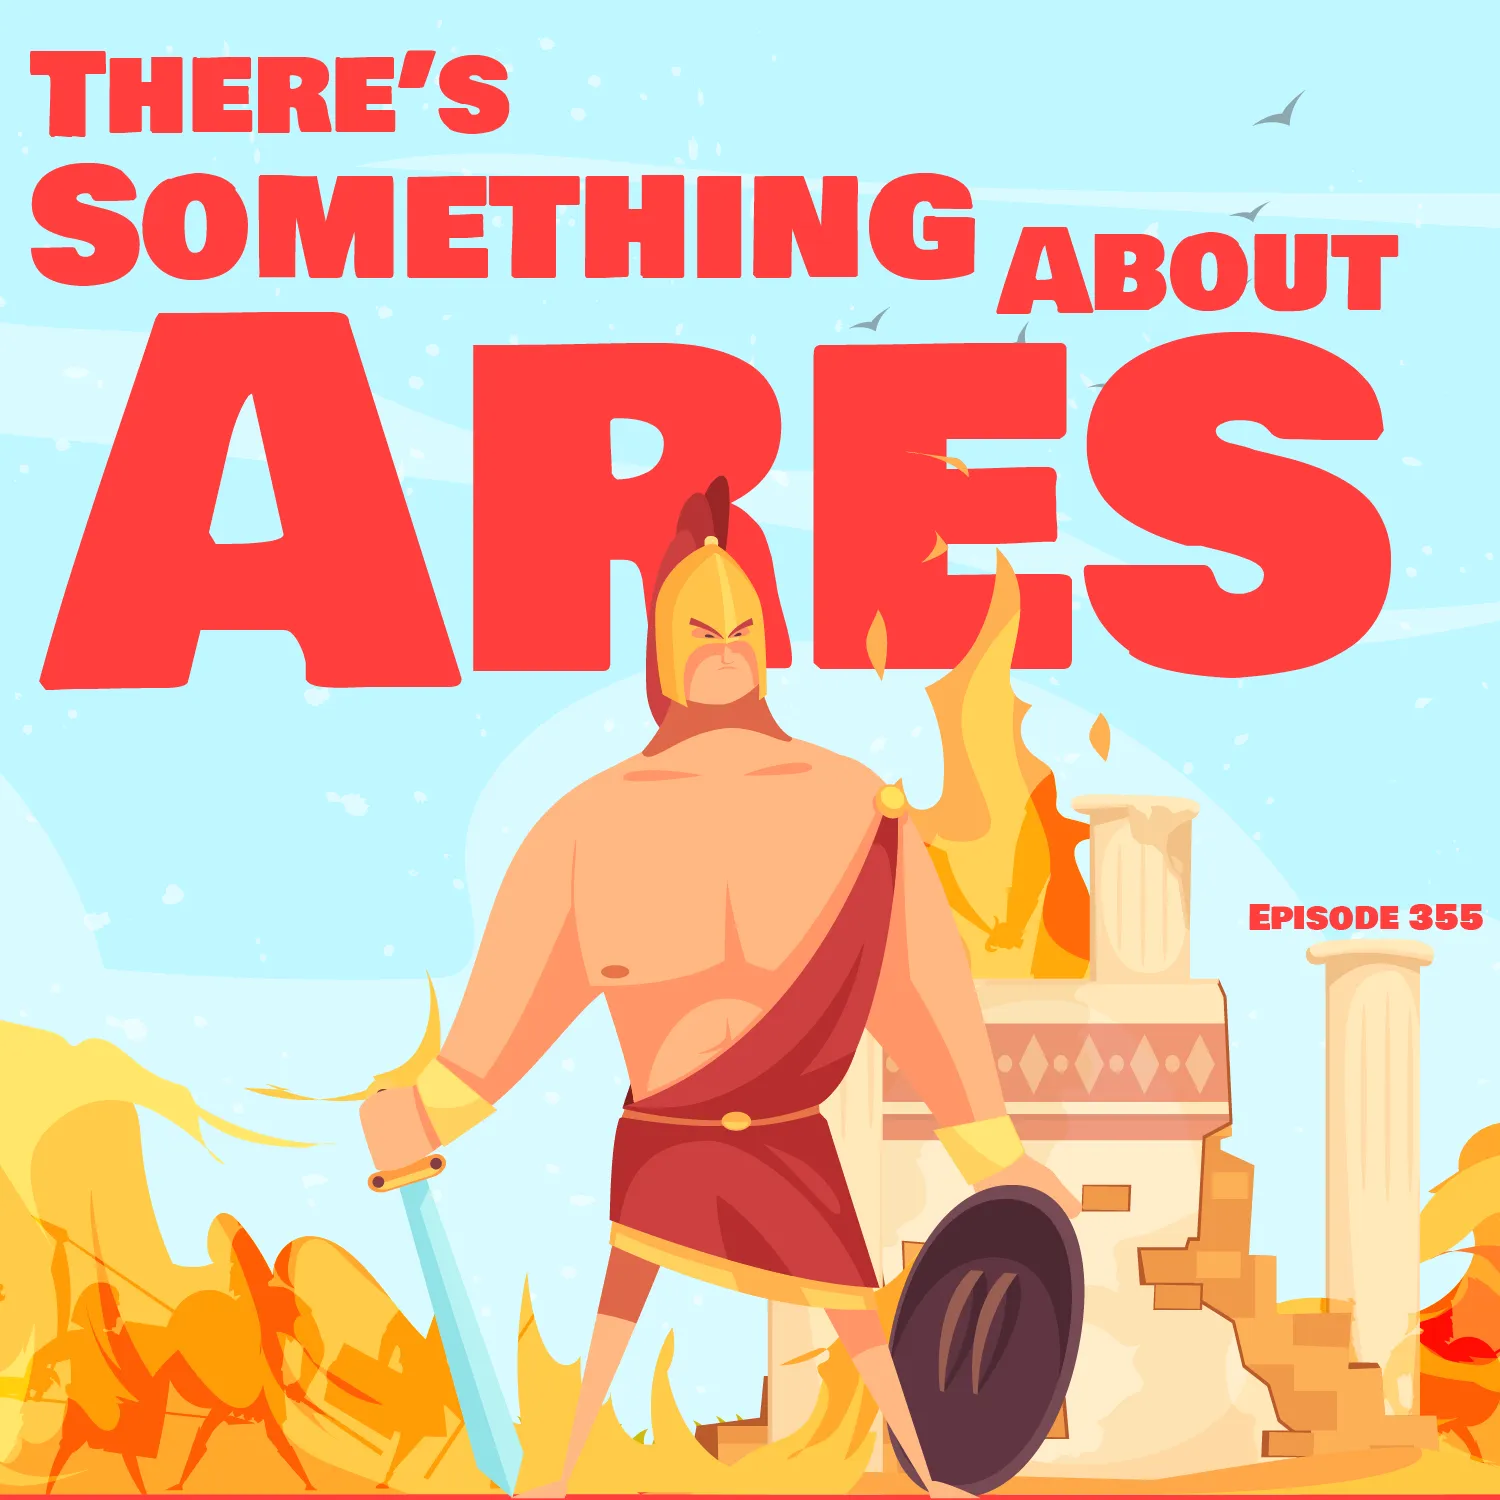 Illustration of a muscular cartoon character resembling Ares, the Greek god of war, standing confidently with a sword in one hand and a shield in the other. Behind him, there's a fiery scene with silhouettes of soldiers in combat and ancient Greek architecture. The sky is light blue with clouds and birds flying. Large red text above reads 'THERE'S SOMETHING ABOUT ARES,' with 'EPISODE 355' below in a smaller font.